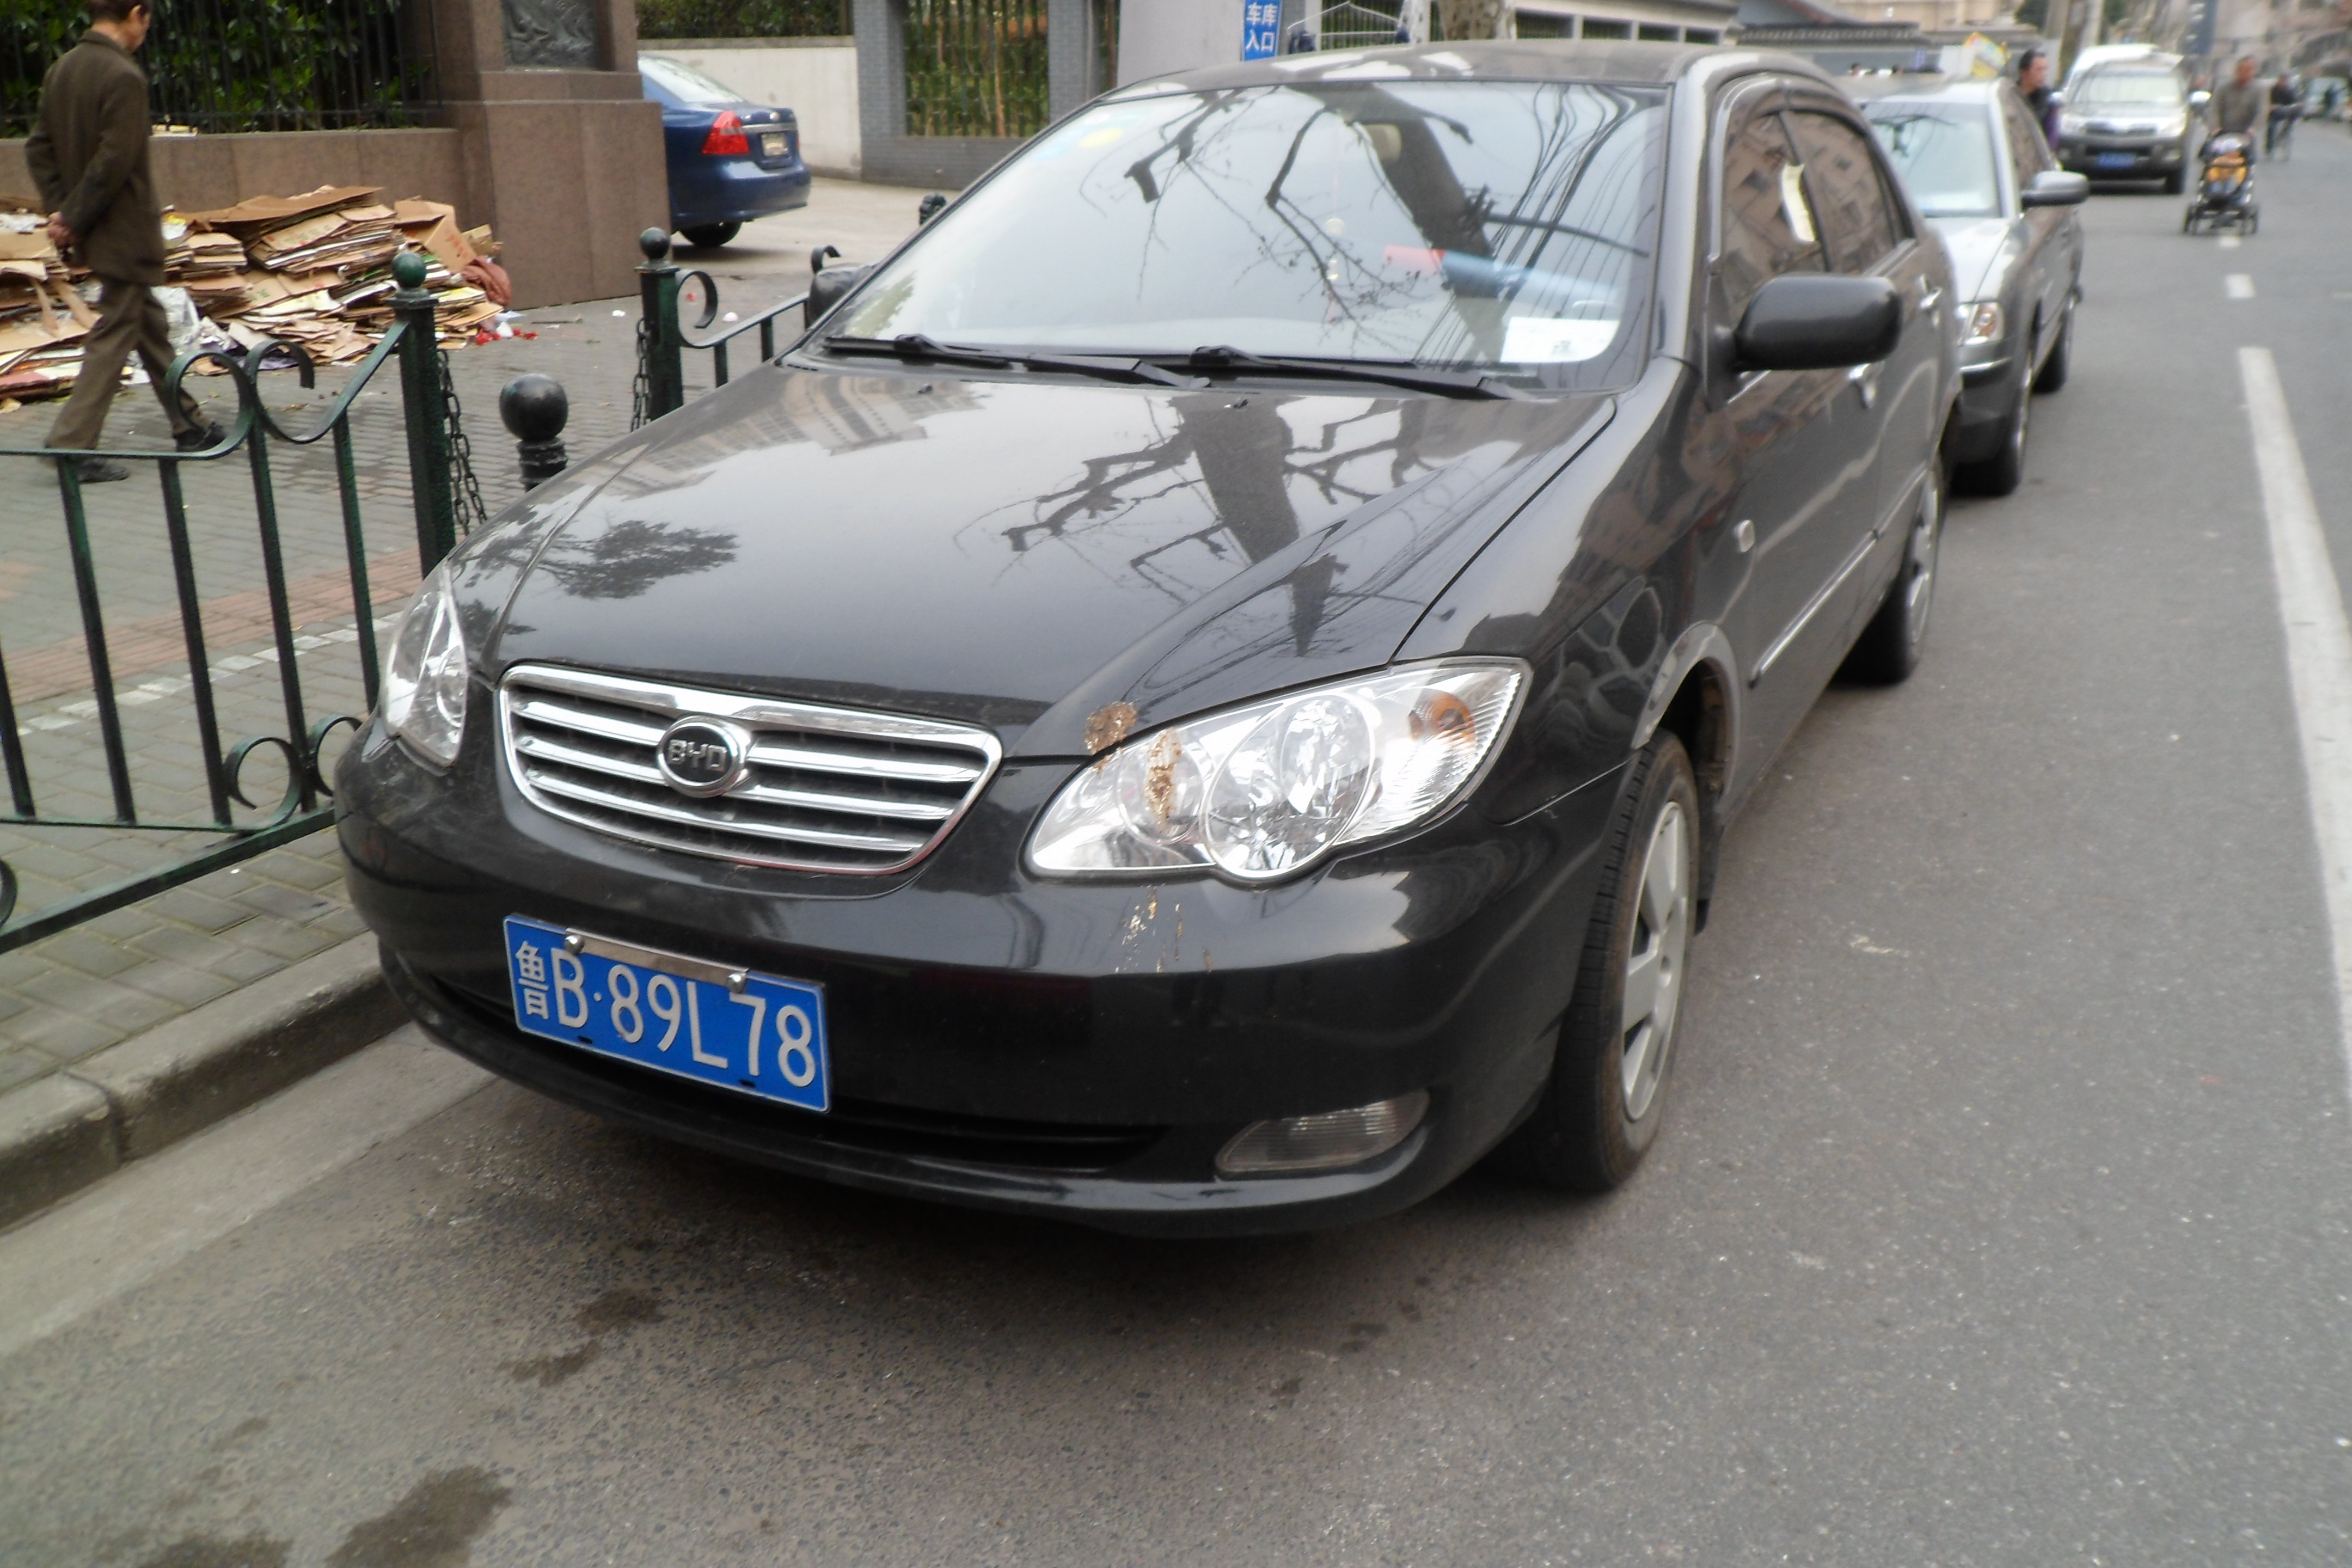 Dossier: BYD F3 Chine 2012-04-04.JPG - Wikimedia Commons